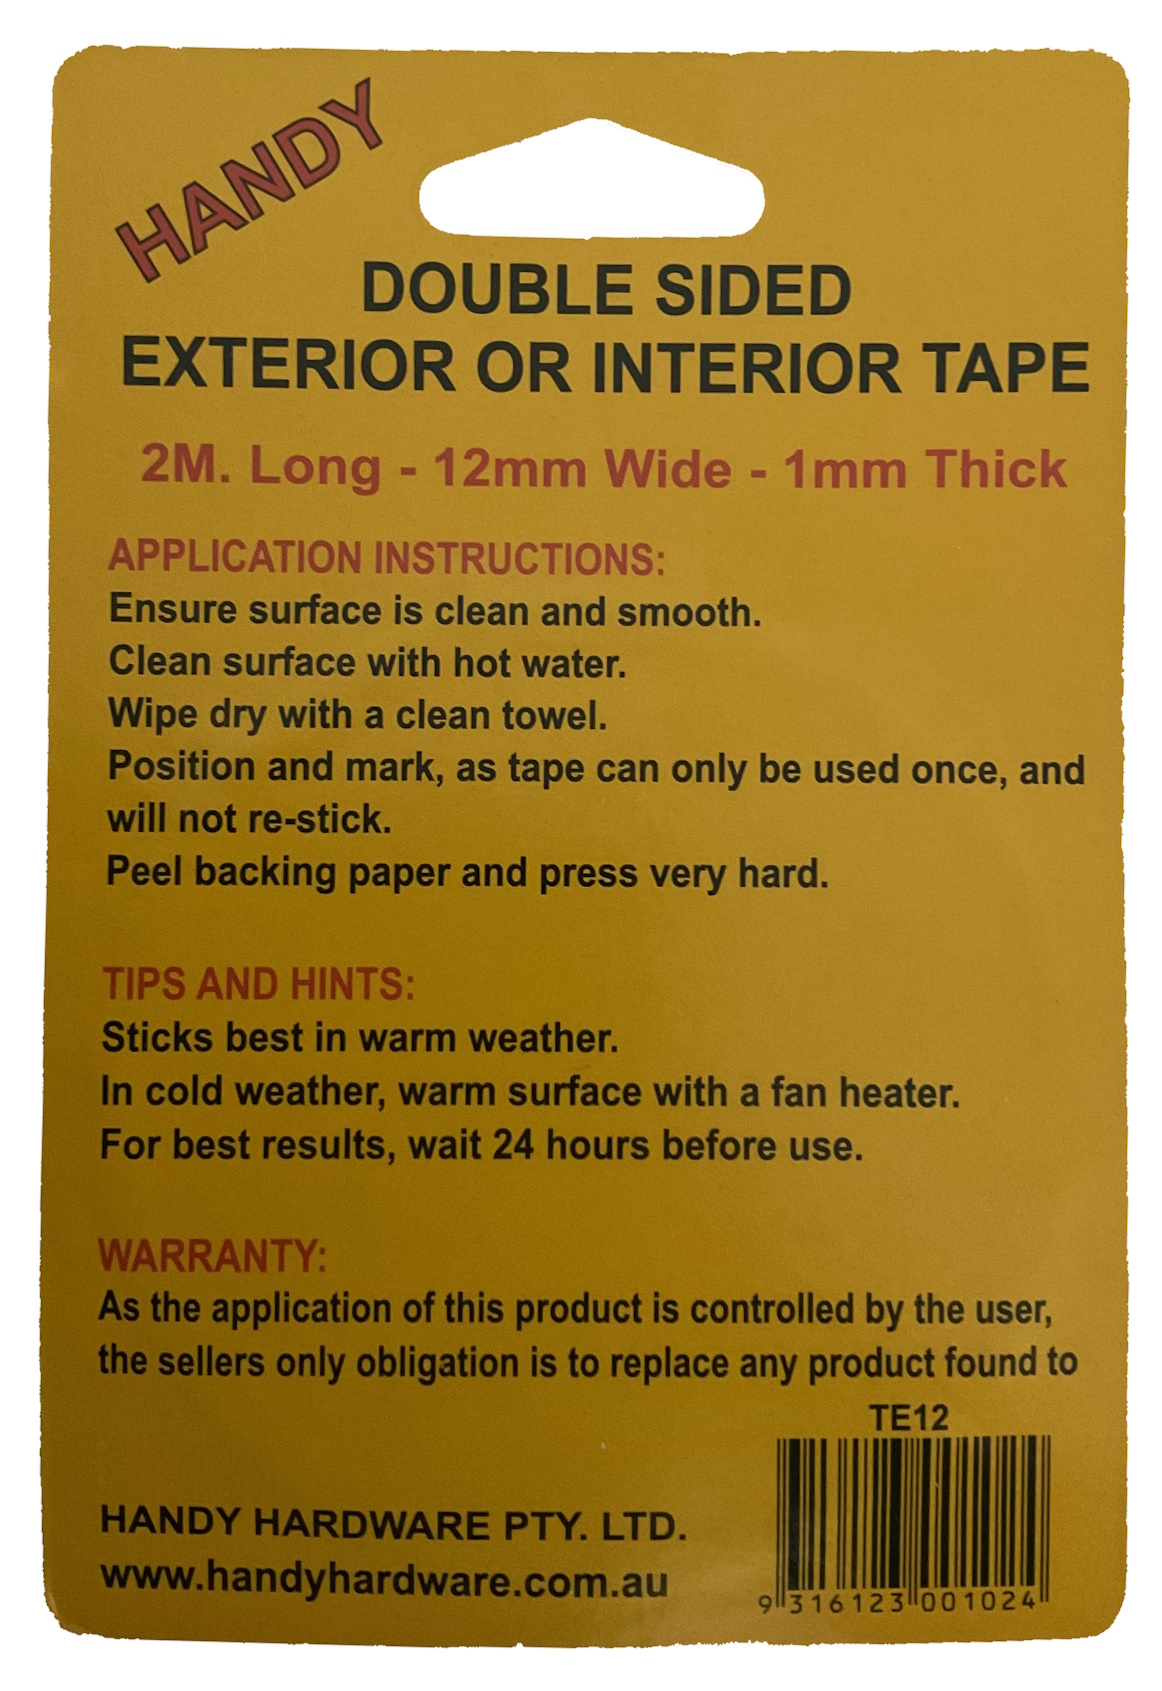 Uses For Double Sided Tape, Tips & Tricks